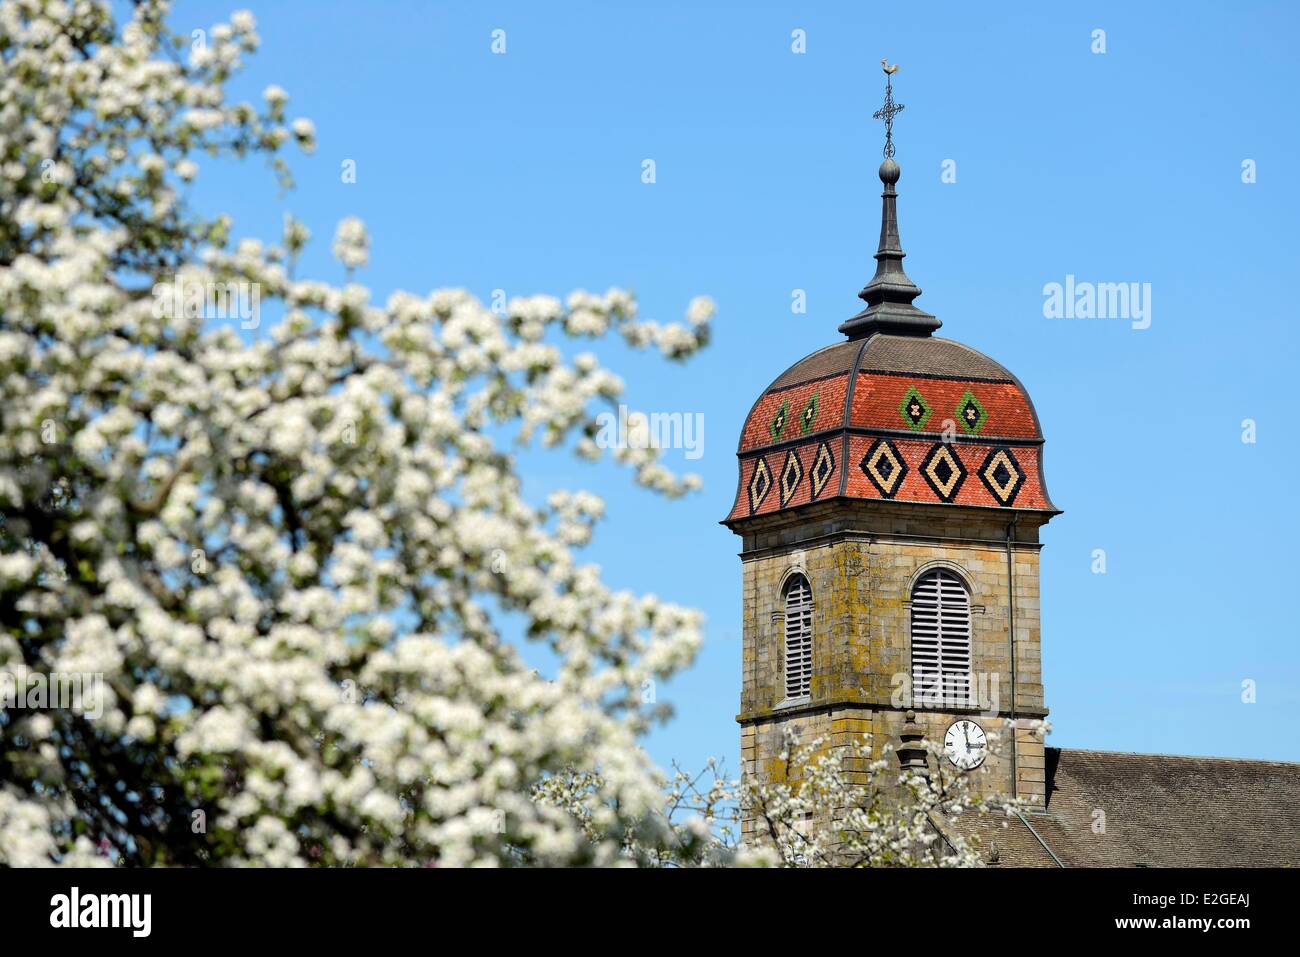 France Haute Saone Fougerolles church imperial tower cherry blossoms Stock Photo